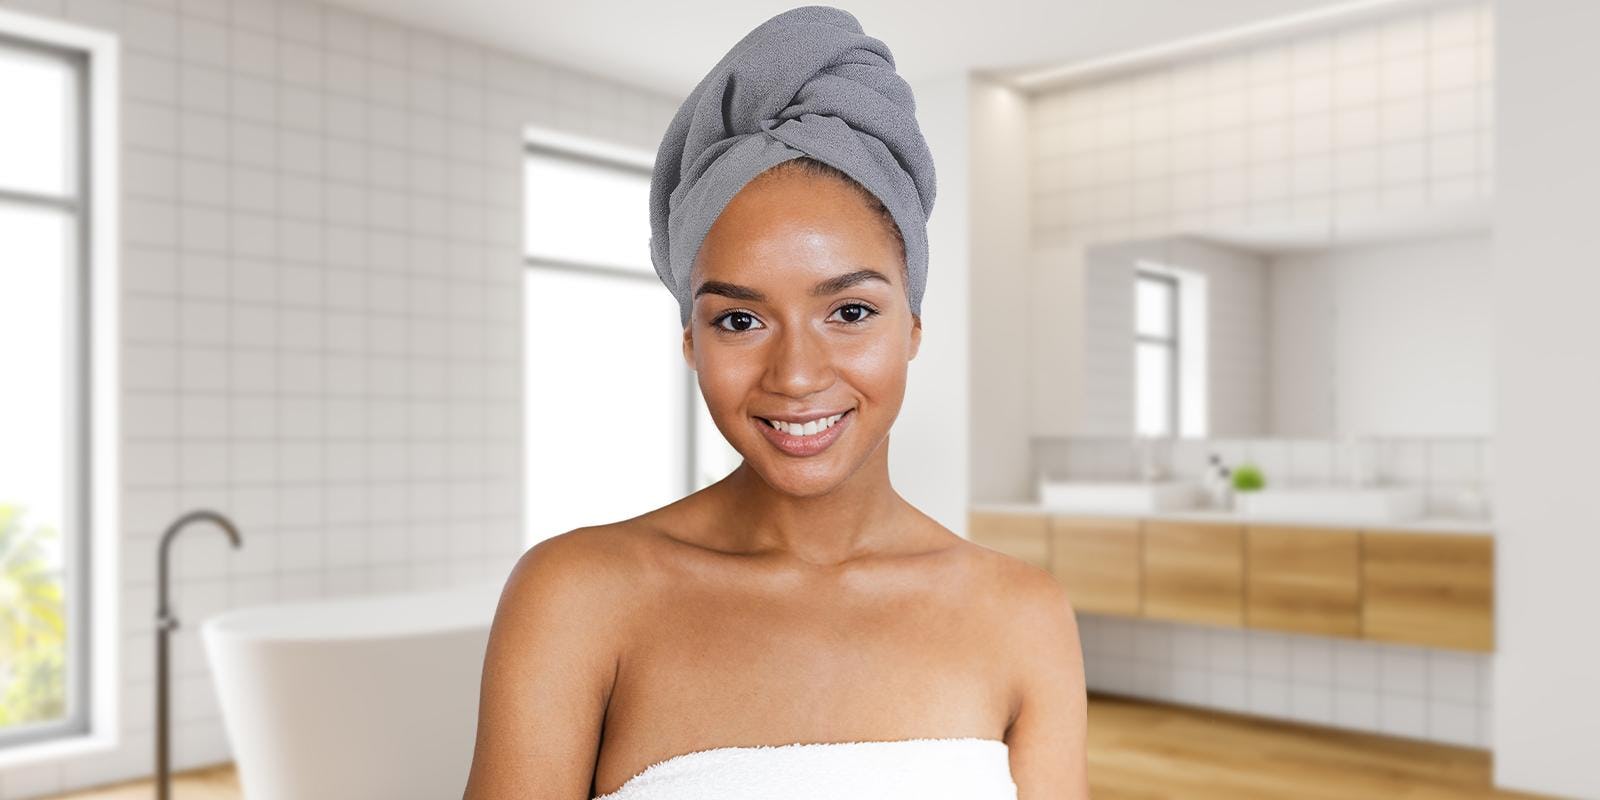 Woman smiling with hair tied up in towel